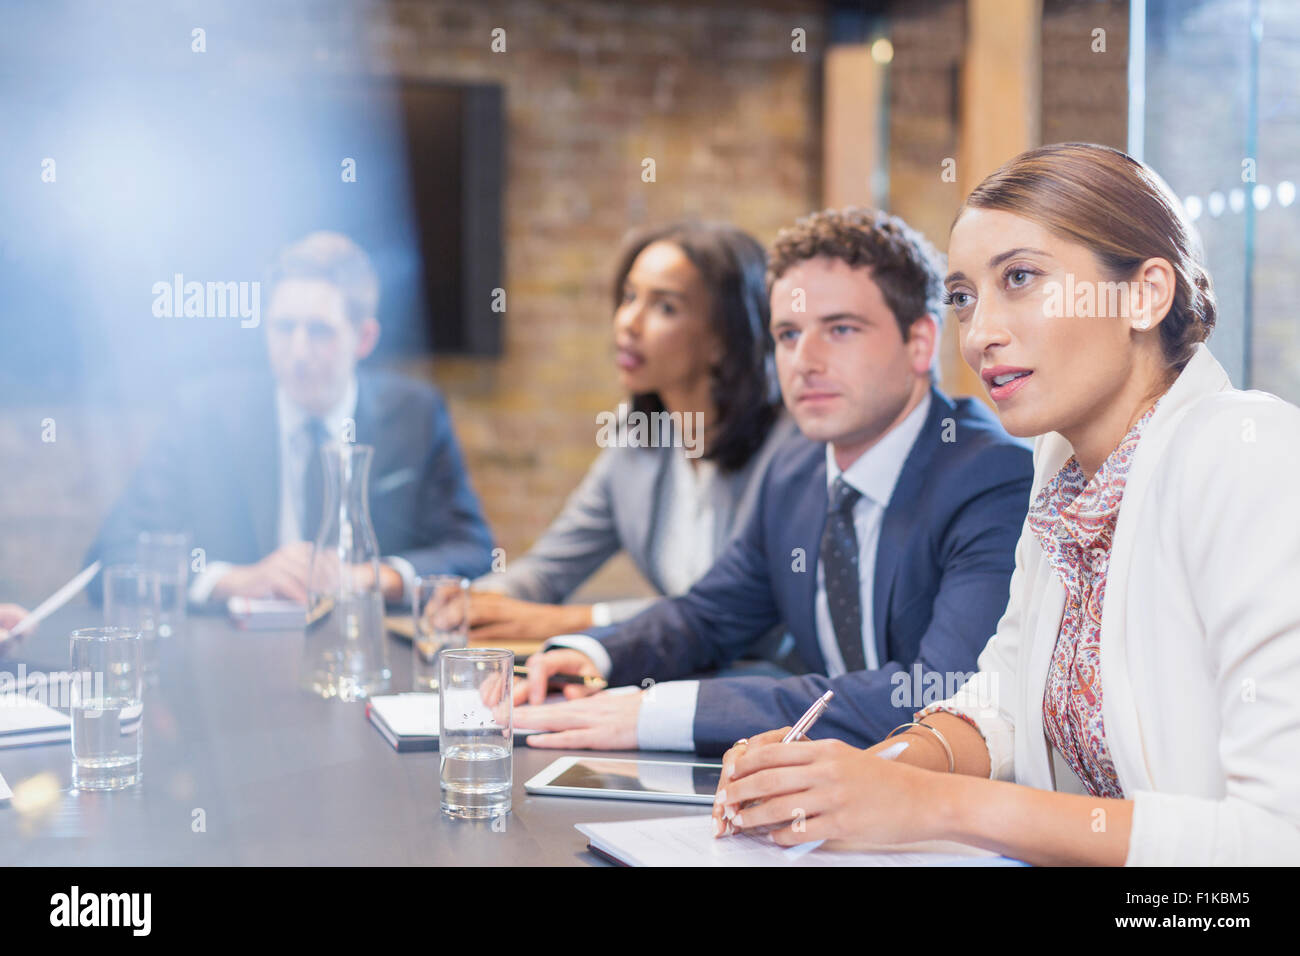 Attentive business people in conference room meeting Stock Photo